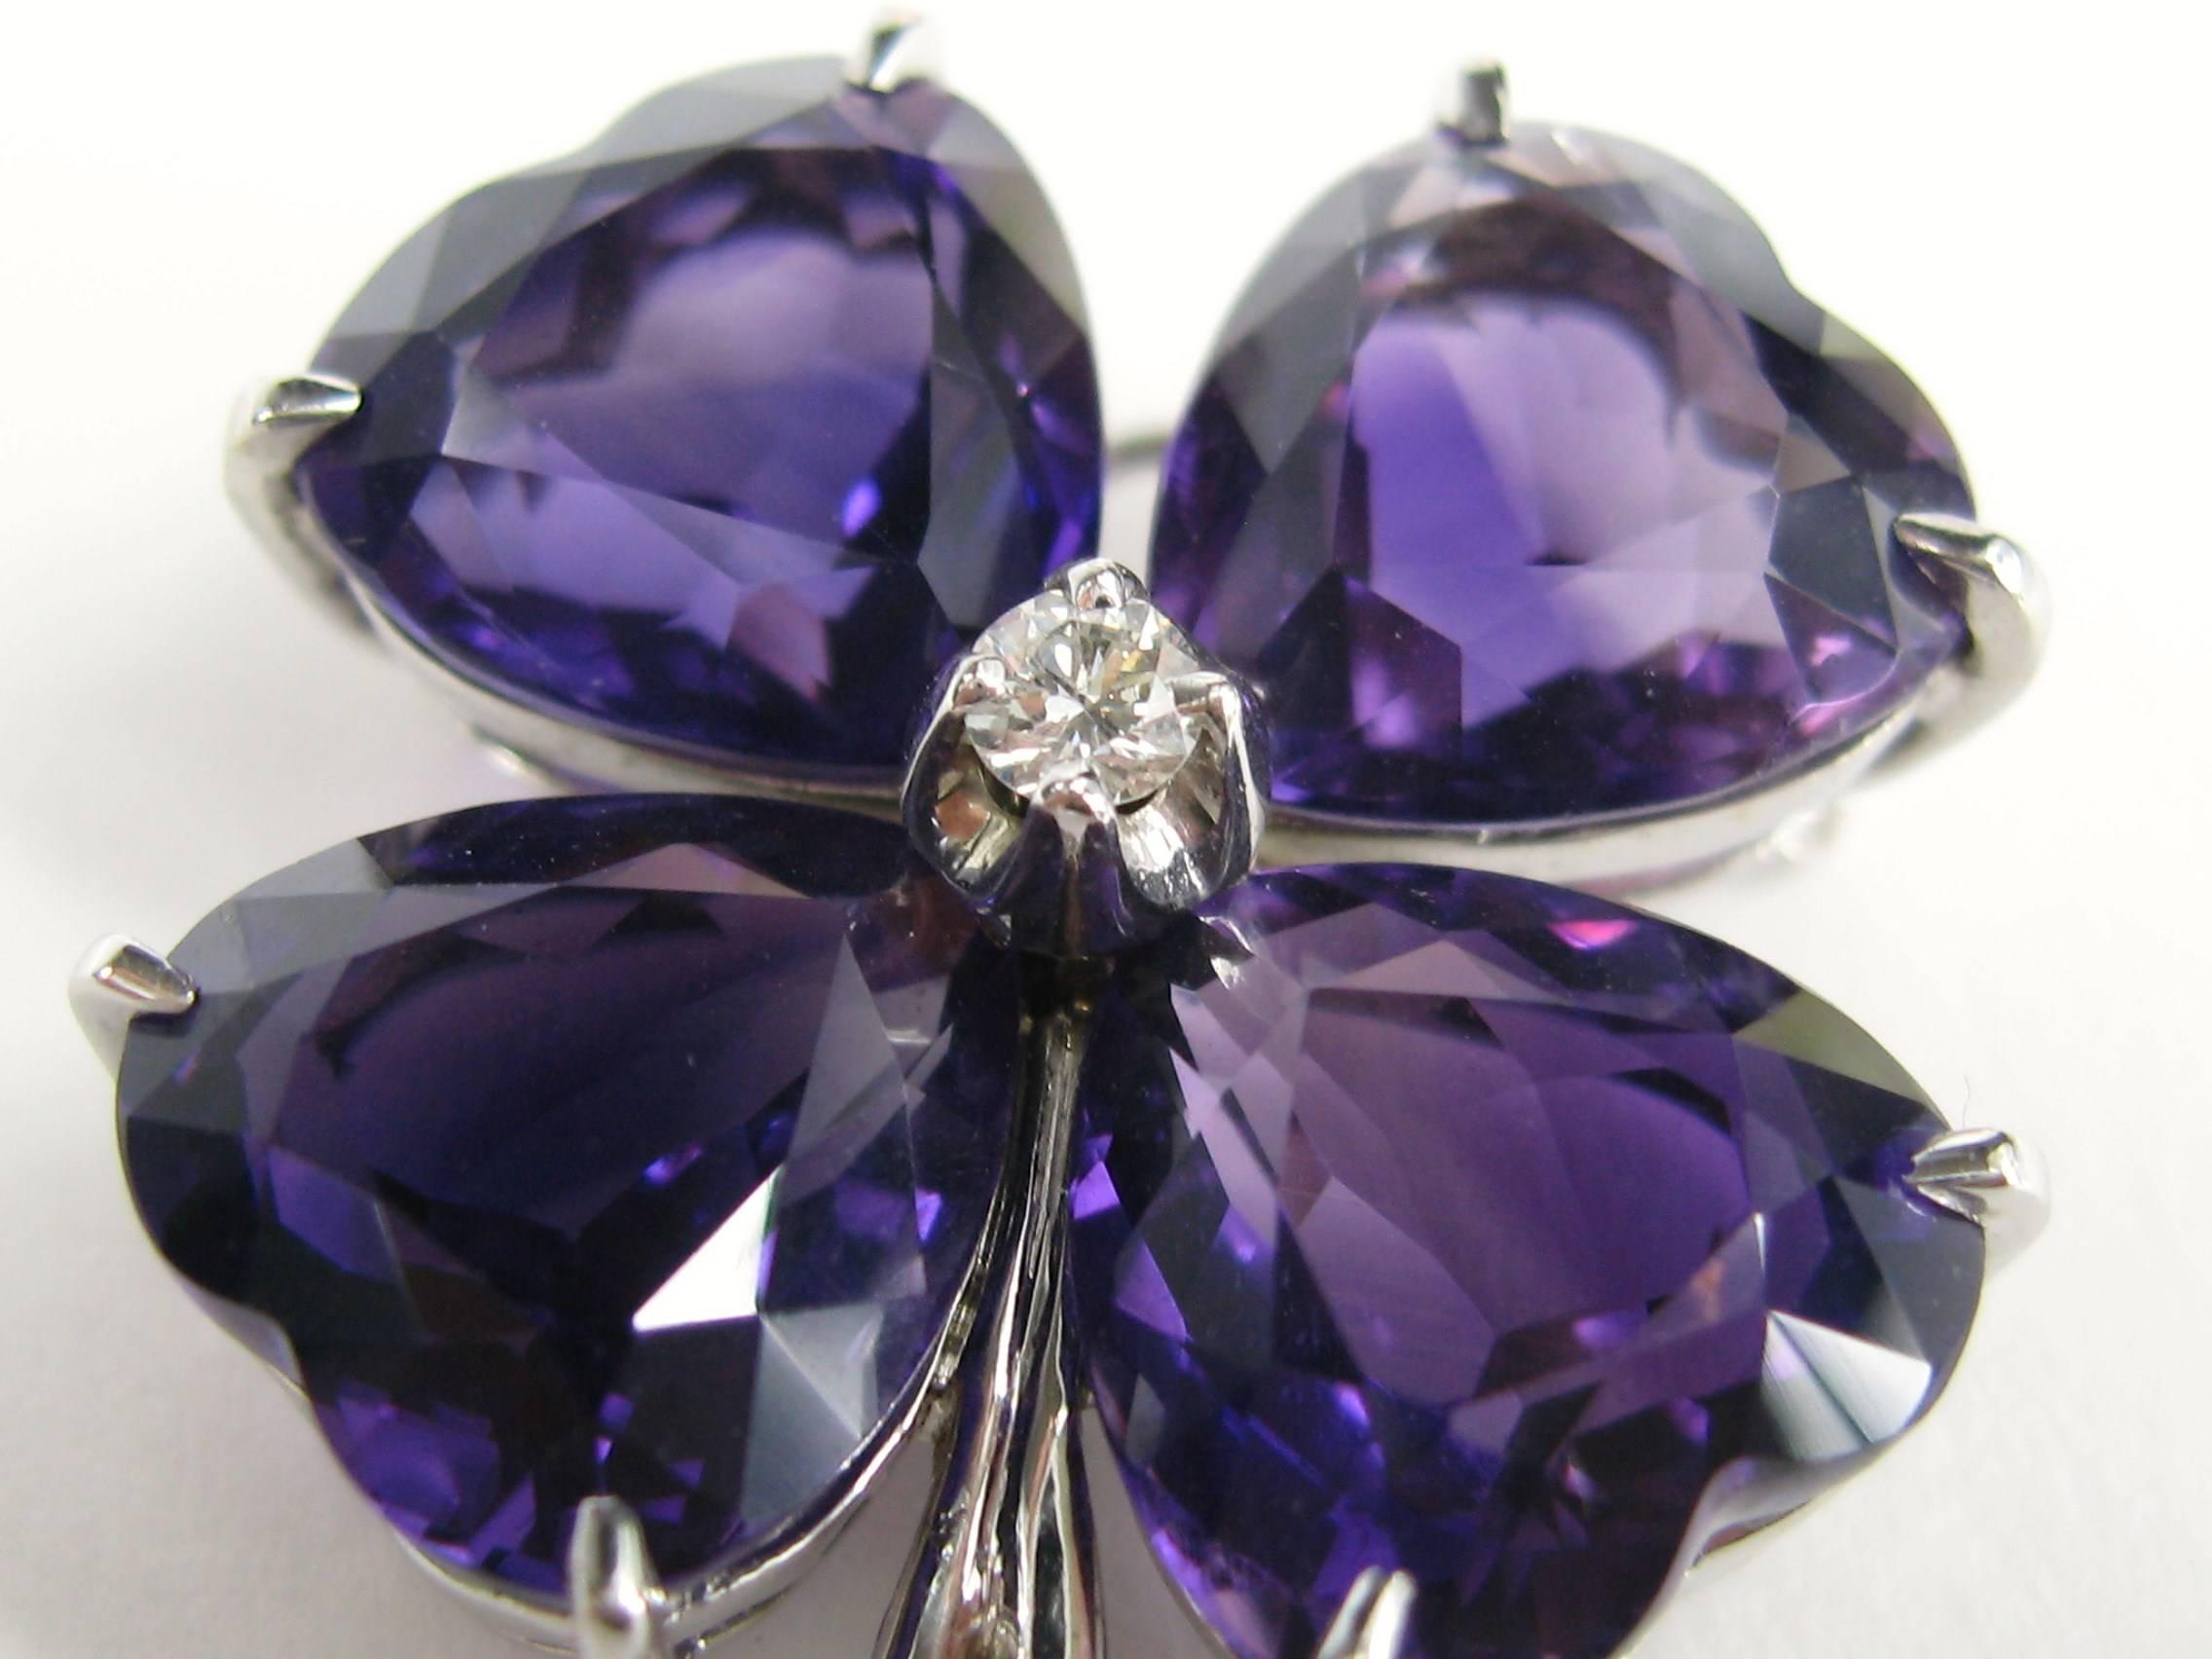 This is fabulous. We have here a Custom made FFF Platinum Amethyst clover Pin.  Matching Earrings also listed on our storefront. Heart cut Amethysts. Brooch measures 1.40 inches Top to bottom x 1.04 wide.  Please check our storefront for hundreds of